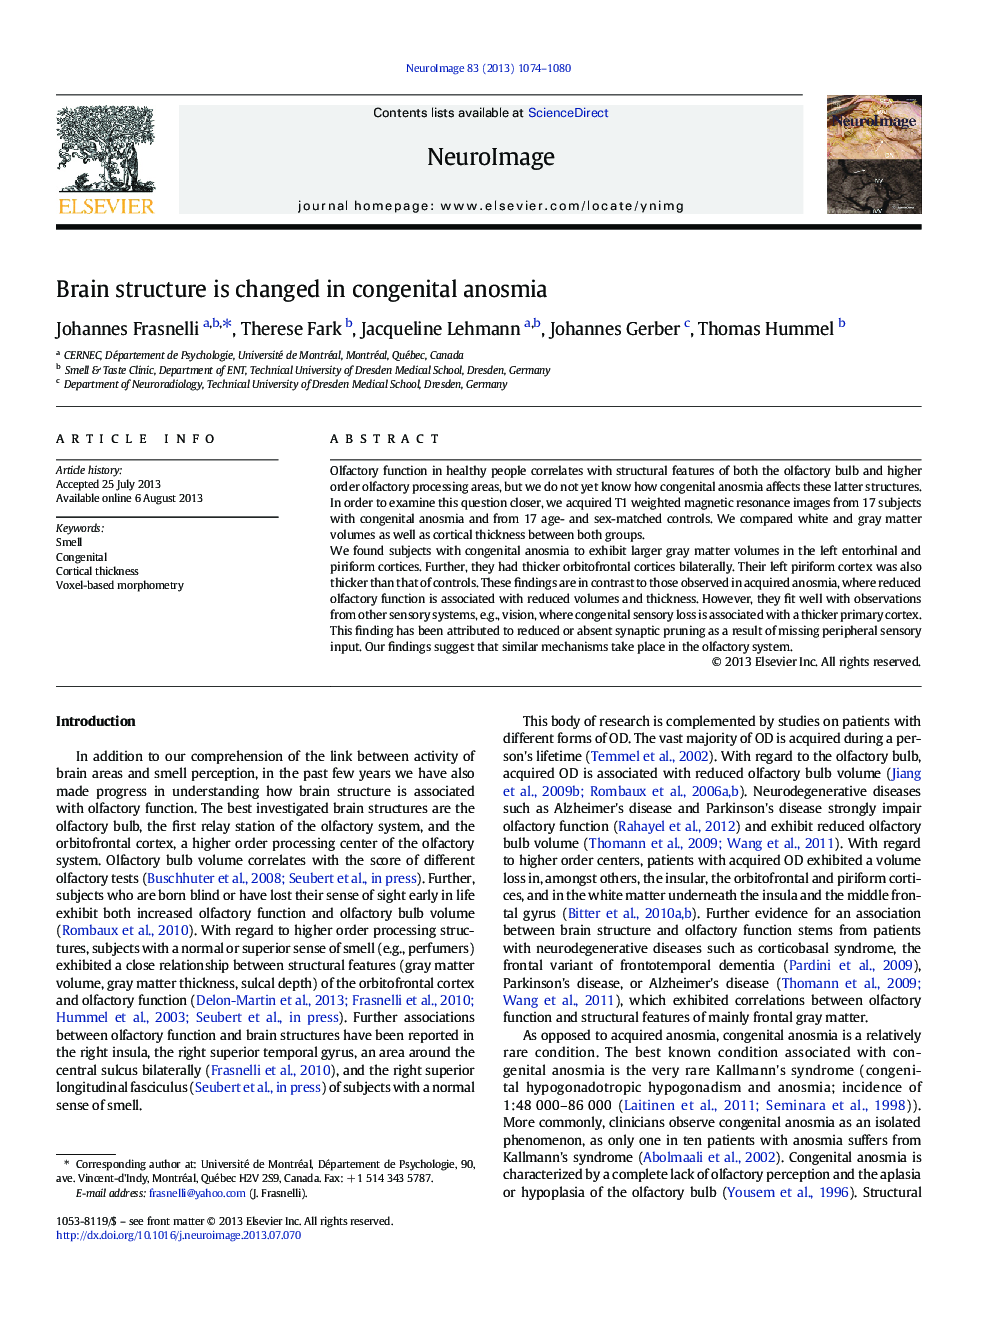 Brain structure is changed in congenital anosmia